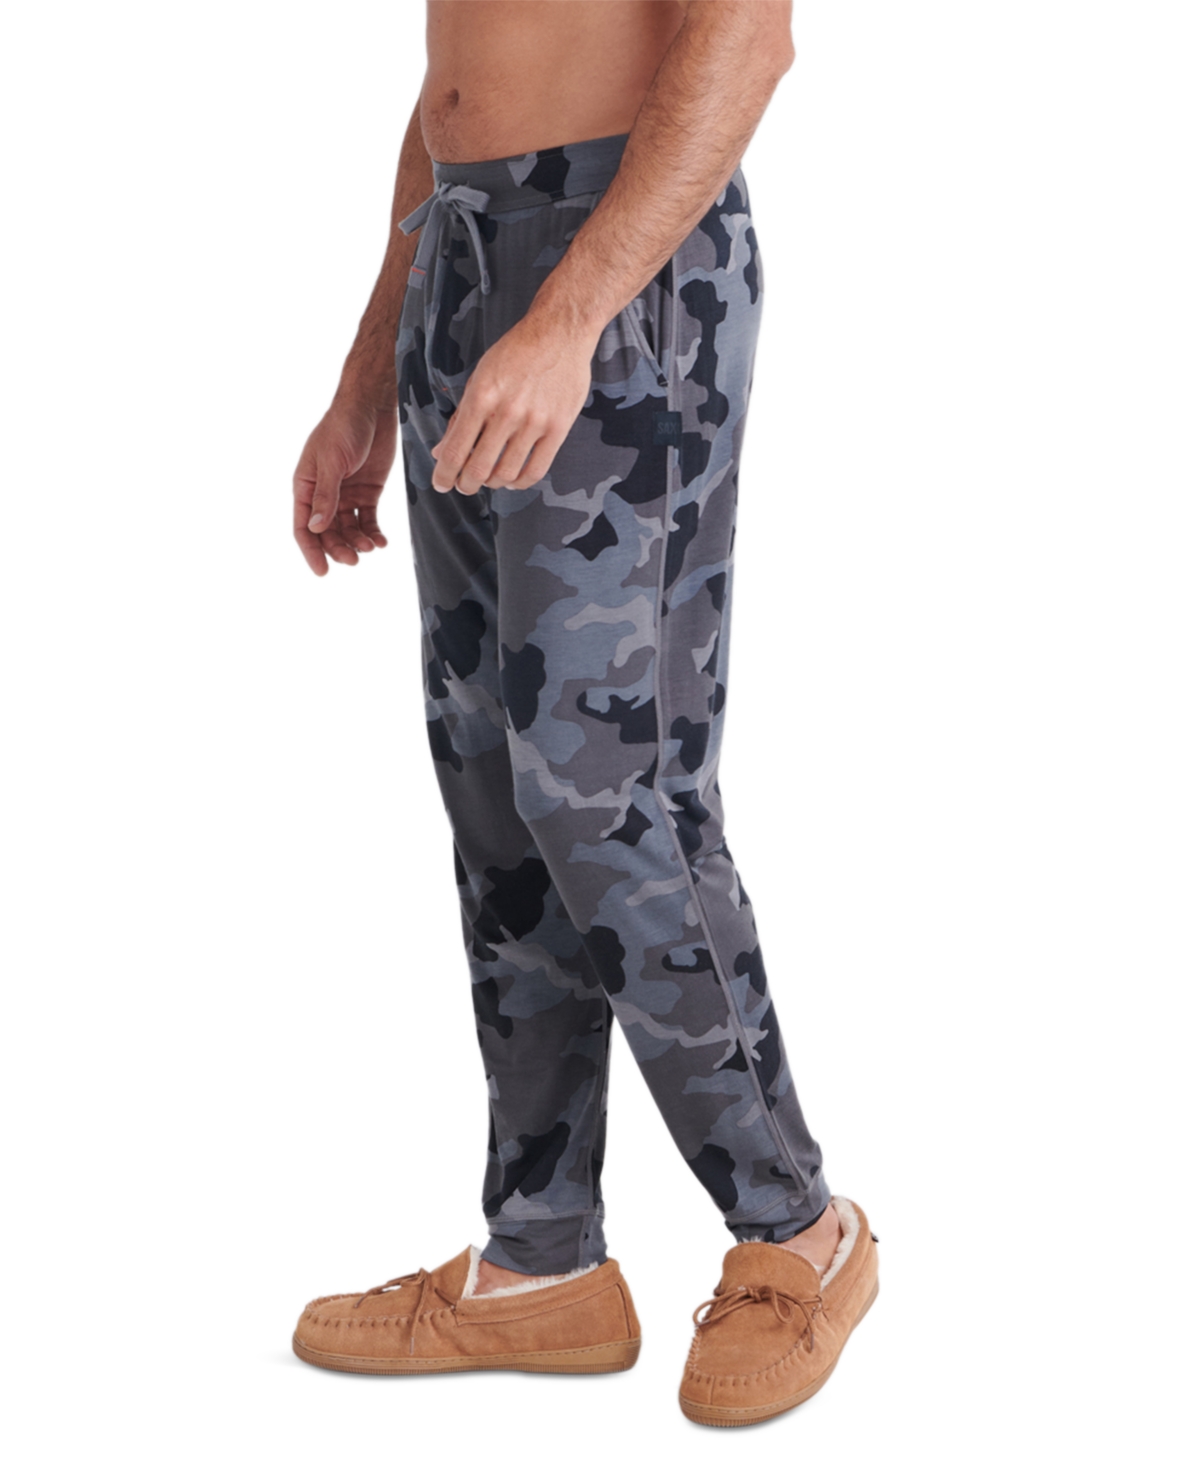 SAXX MEN'S SNOOZE RELAXED-FIT CAMOUFLAGE SLEEP PANTS